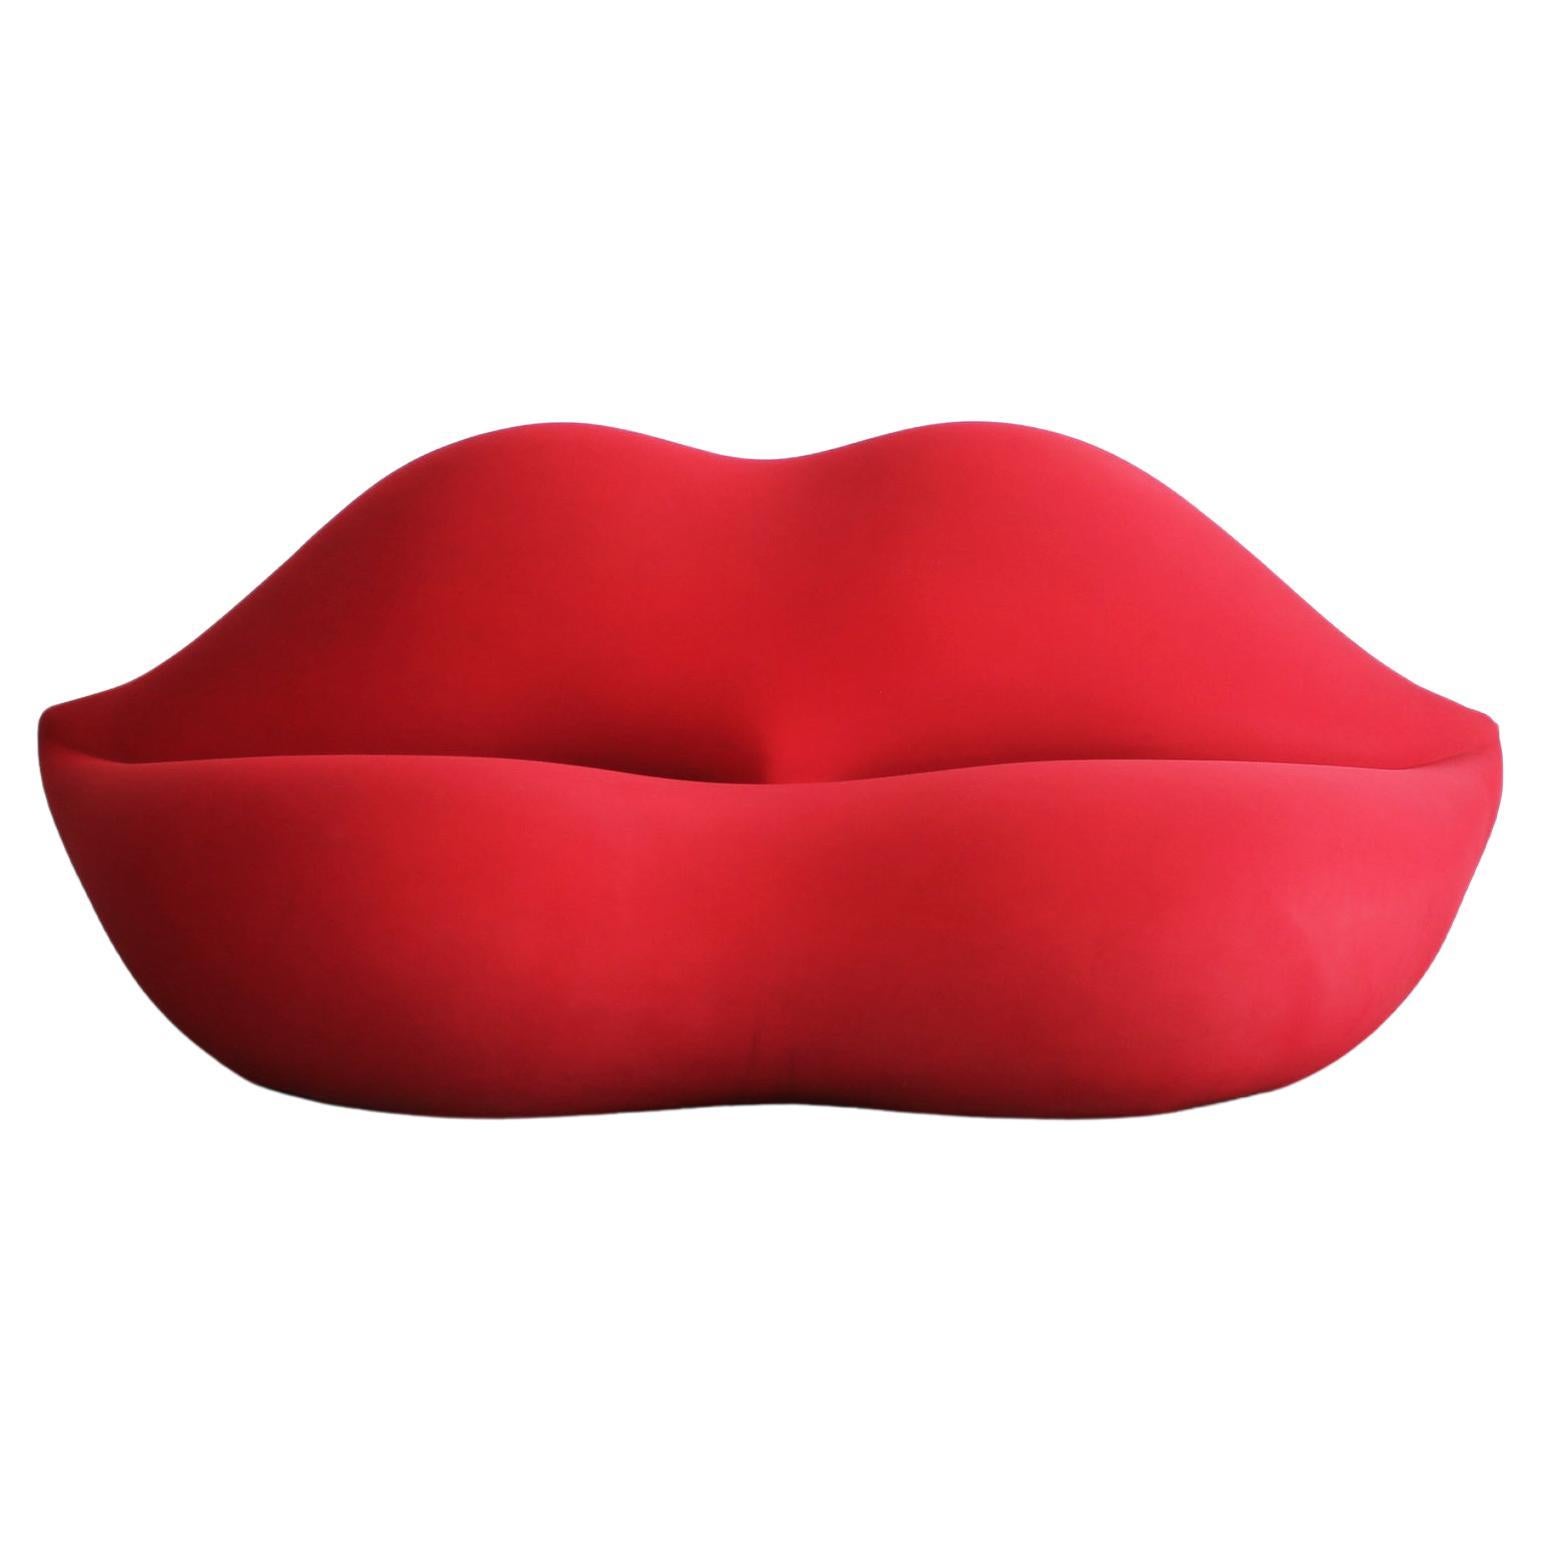 Studio 65 Bocca or Marilyn Sofa in Red Fabric by Gufram 1970s For Sale